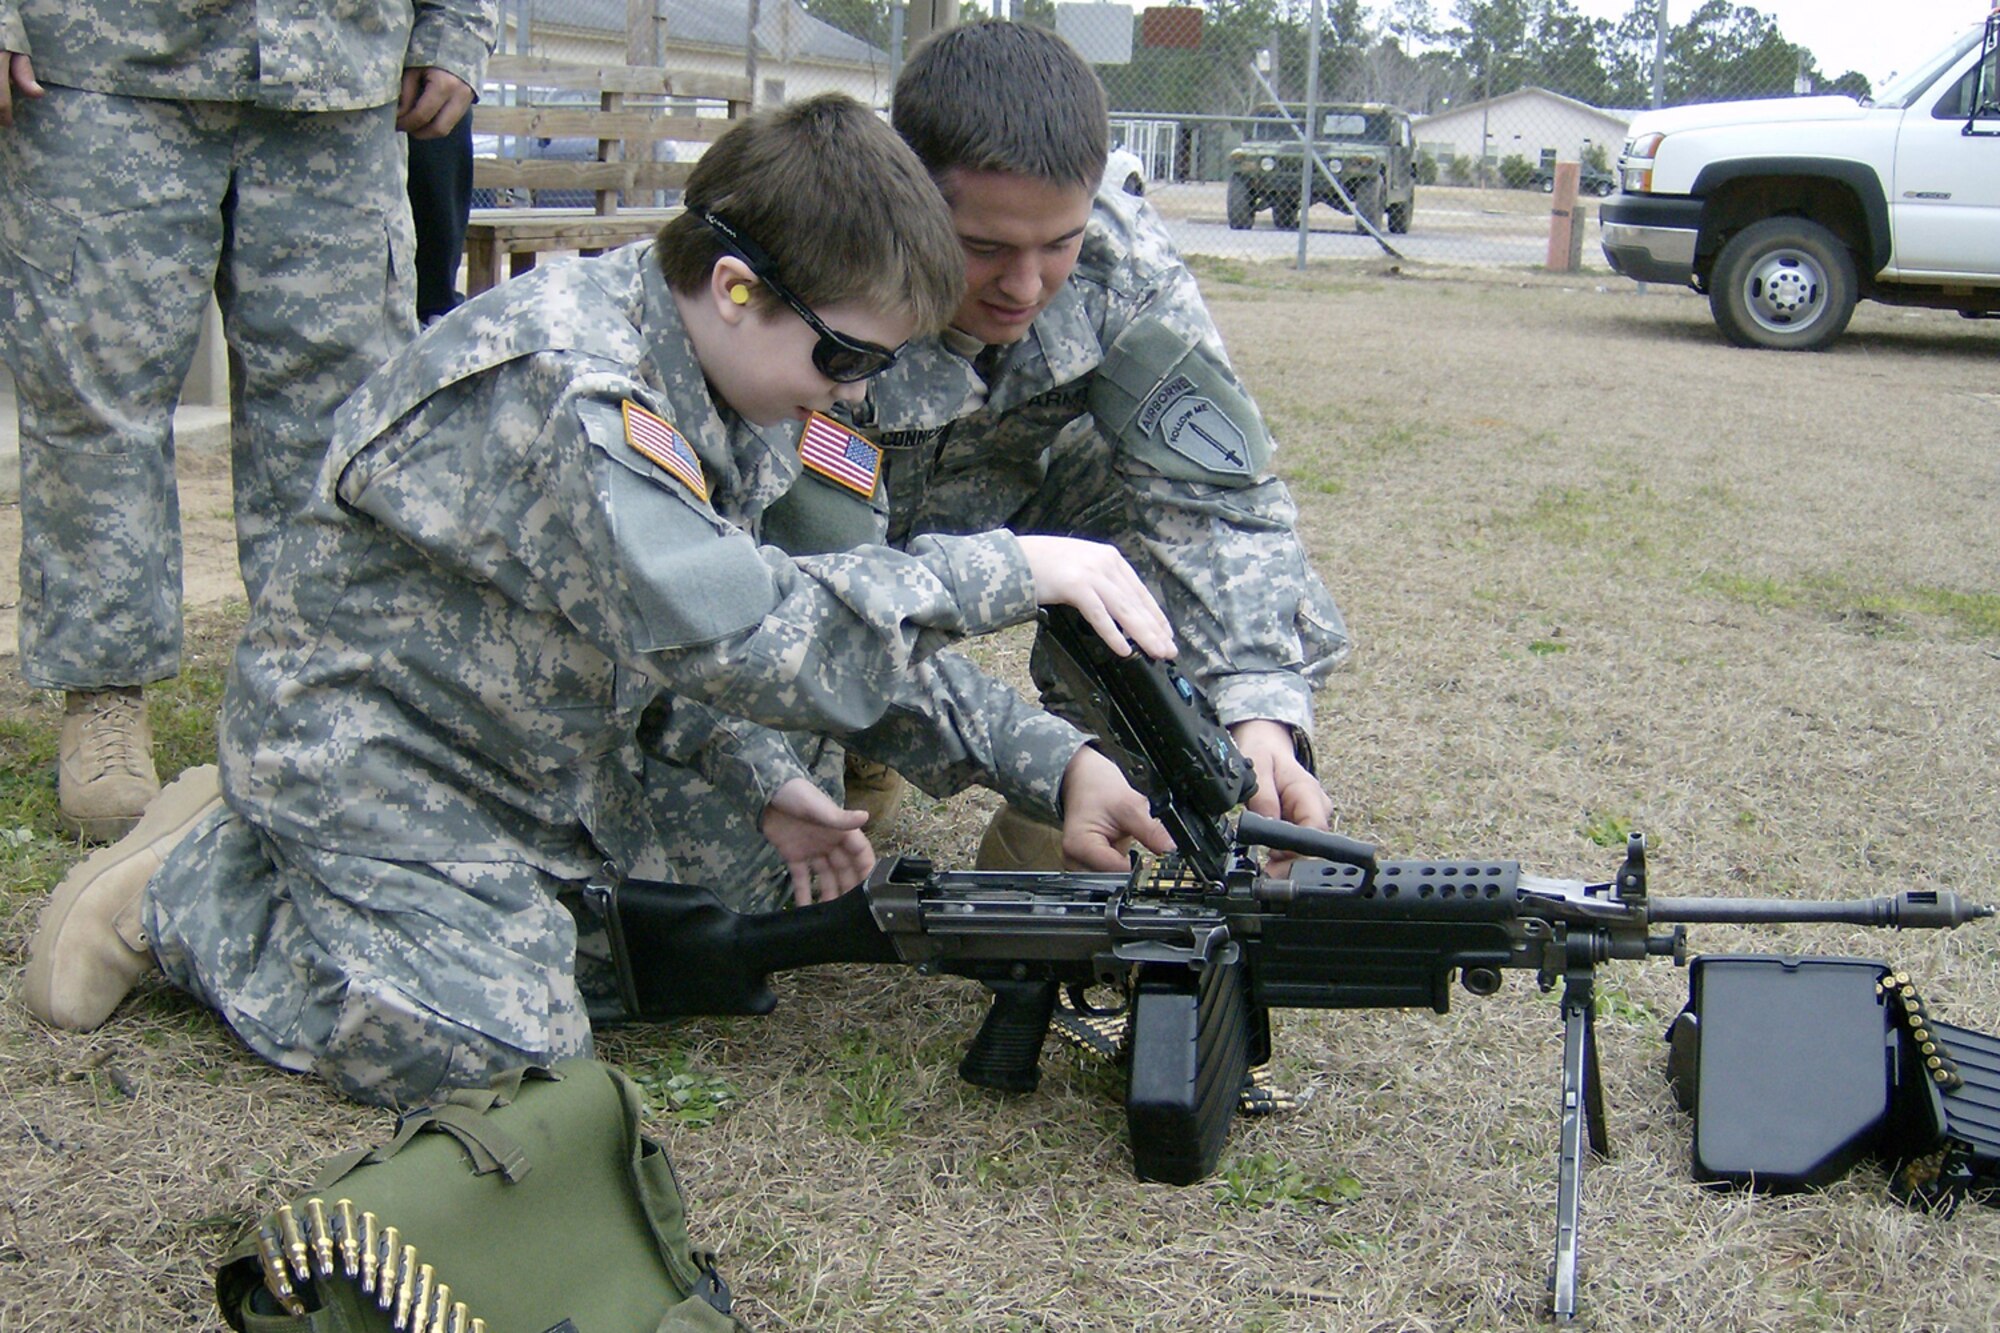 CAMP RUDDER, Fla. -- U.S. Army Spc. Kipper Connell, 6th Ranger Training Battalion armorer, help Riley Woina, 14, from Connecticut, load a M-249 Feb 20. Riley, diagnosed with cystic fibrosis, was granted a week with the 6th Ranger Training Battalion and Eglin Airmen through the Make-A-Wish Foundation Feb. 19-24. (U.S Army photo by Army Capt. Jeremiah Cordovano)